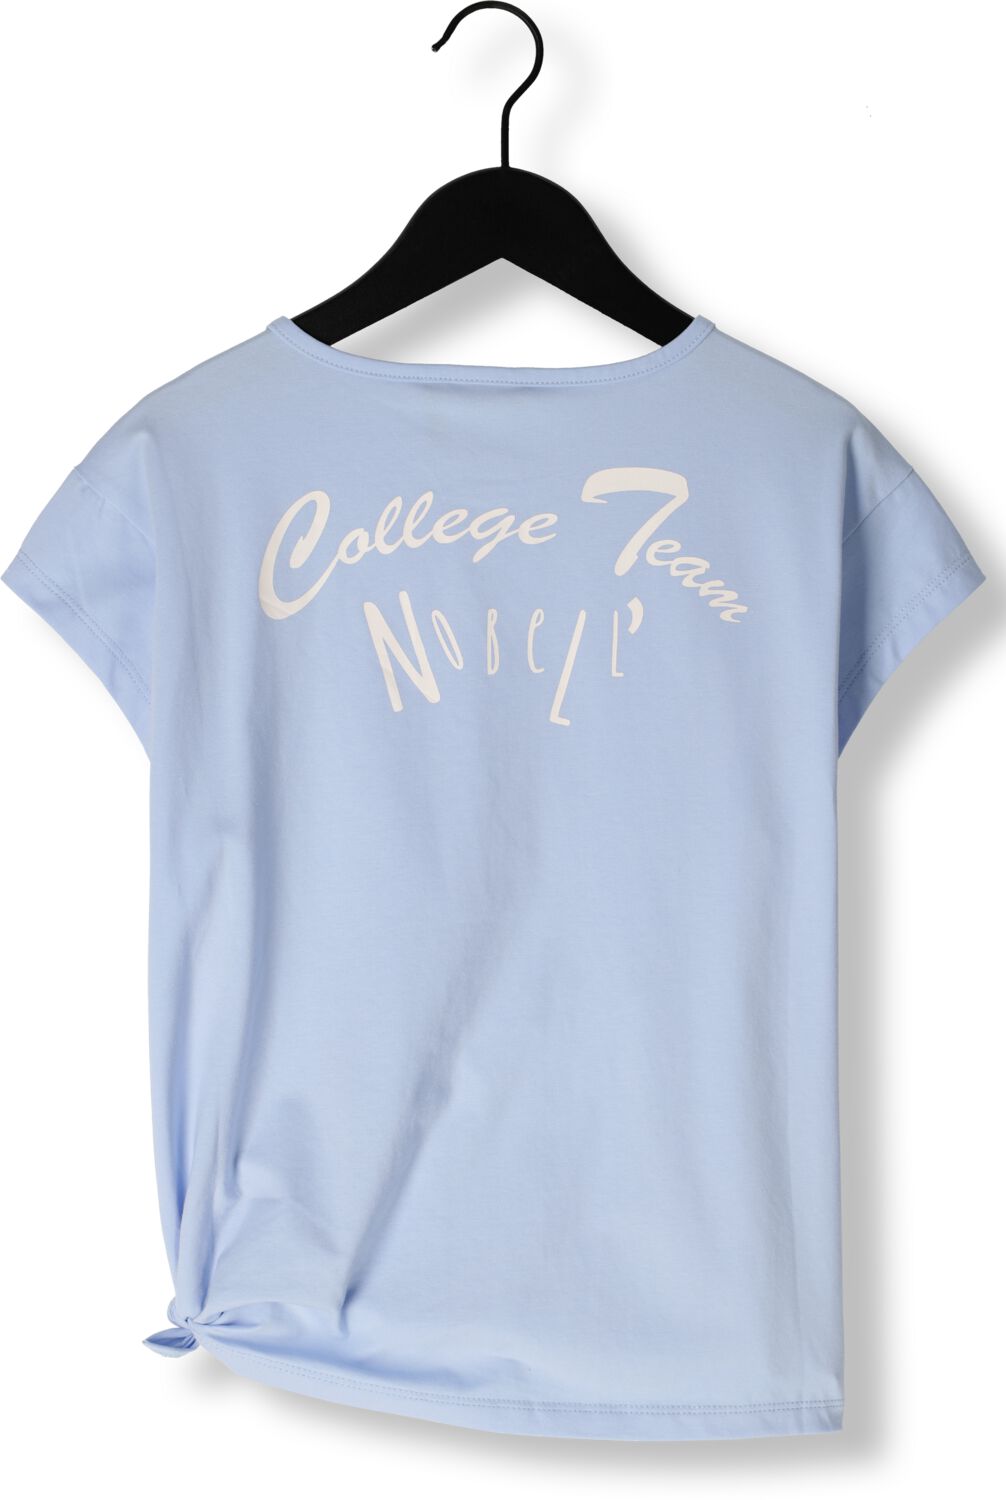 NOBELL Meisjes Tops & T-shirts Kasis Tshirt College Team With Knot Lichtblauw